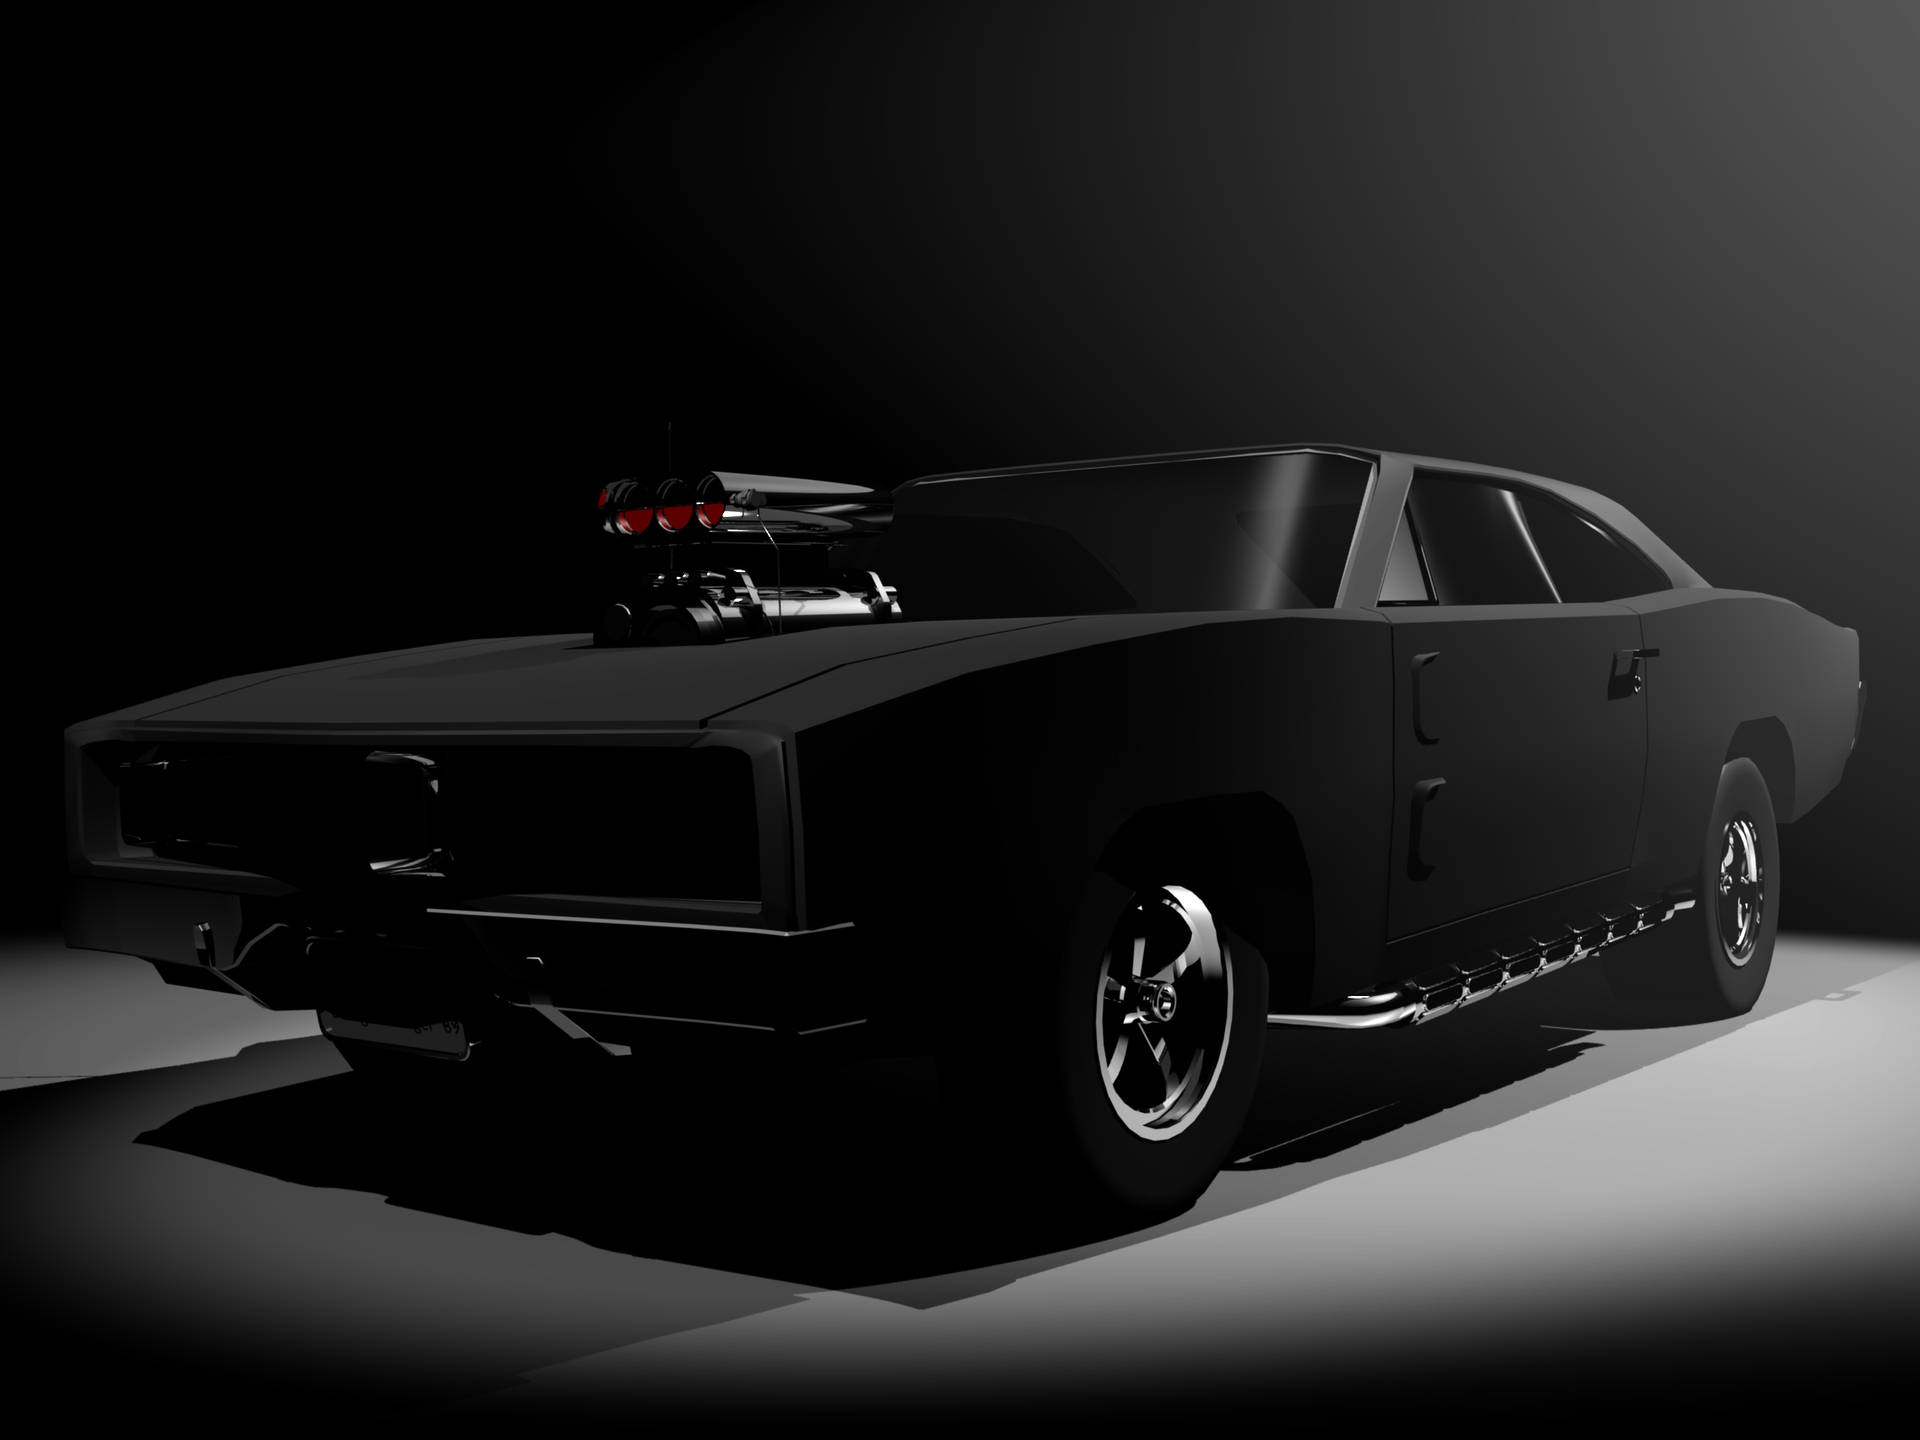 Classic Power - 1969 Dodge Charger Wallpaper